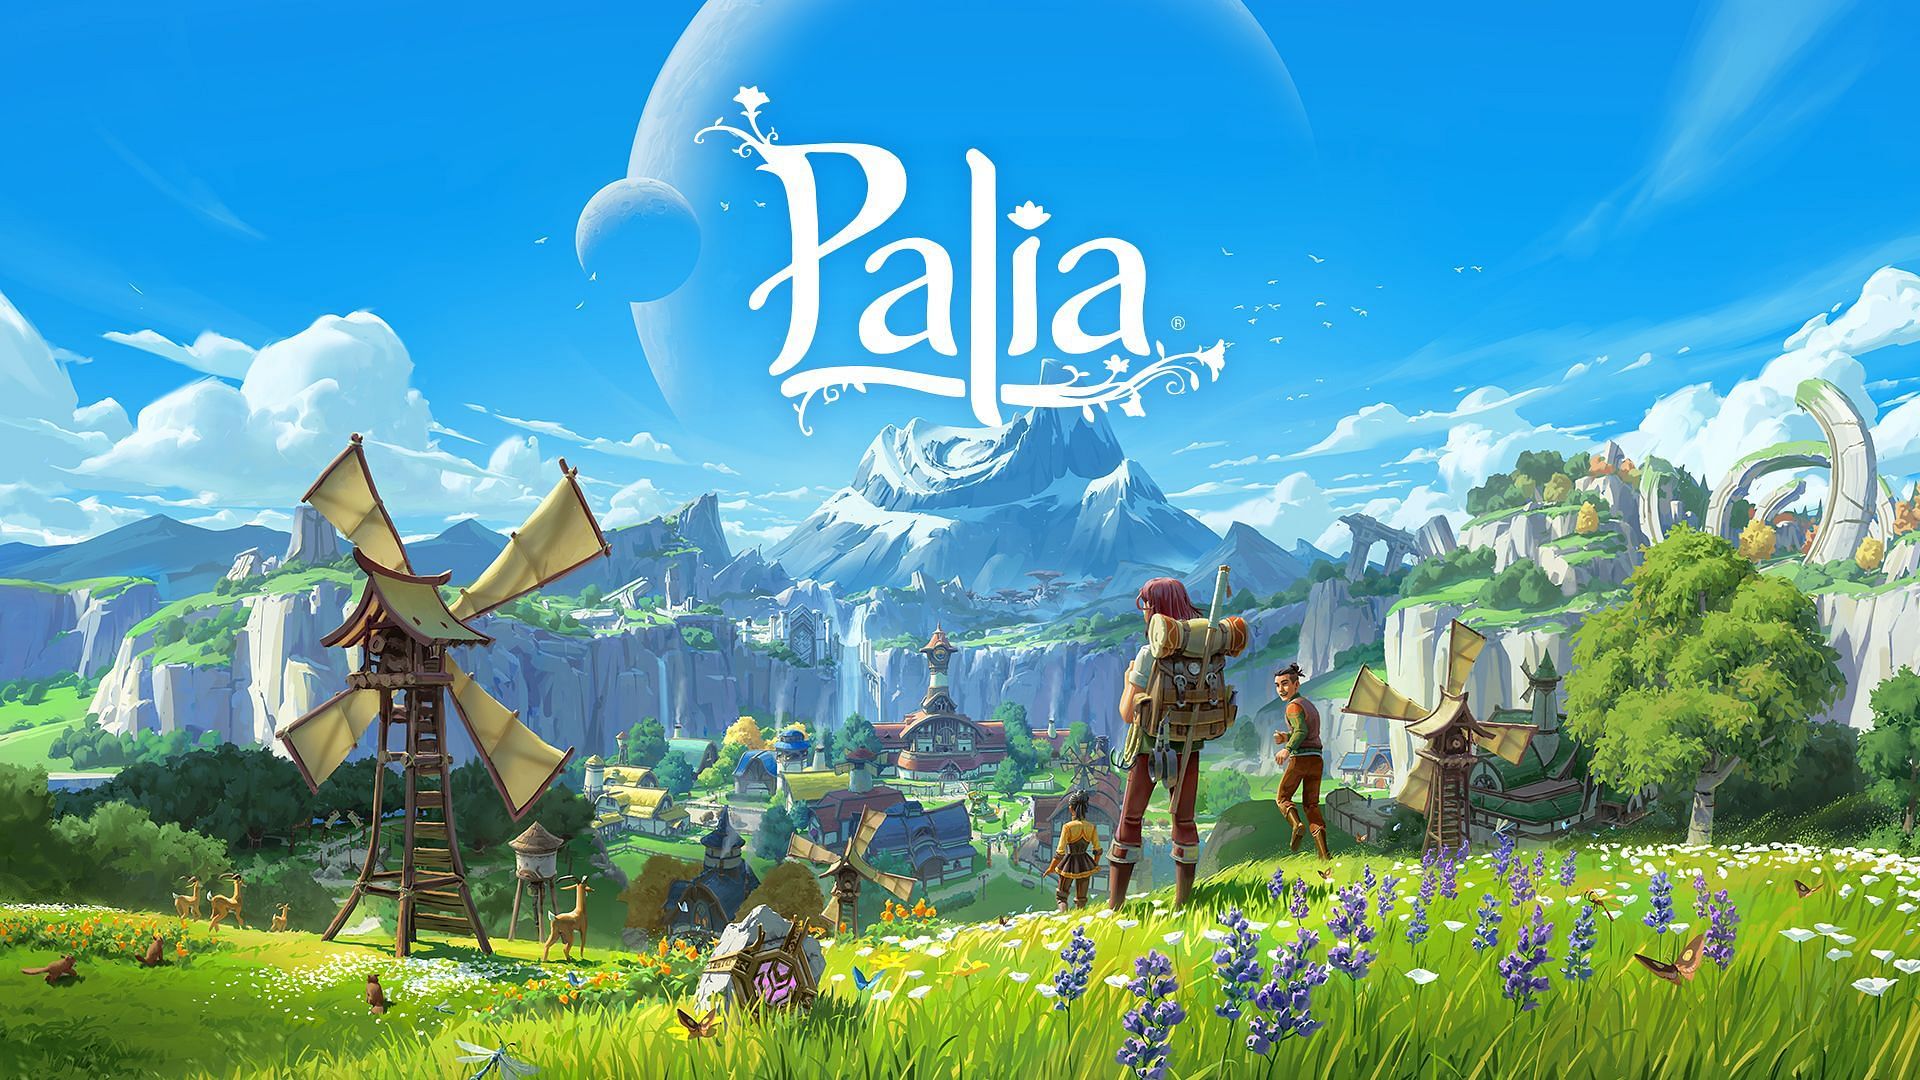 Palia logo along with several characters.